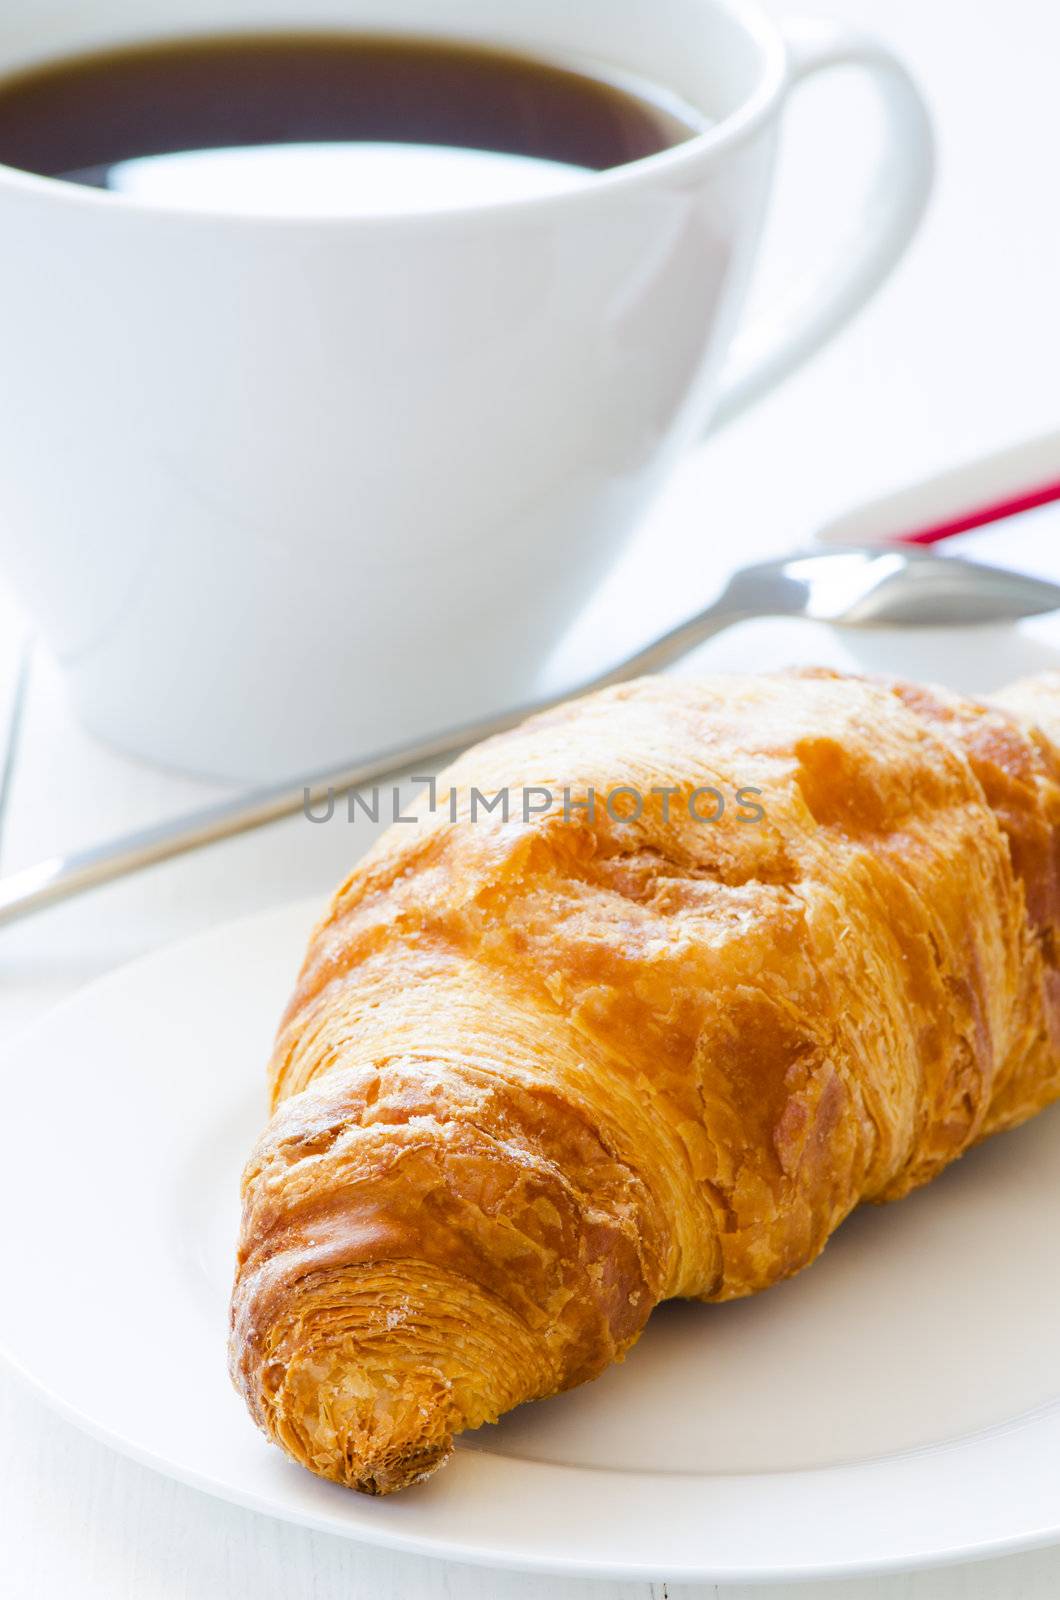 Croissant with coffee by Nanisimova